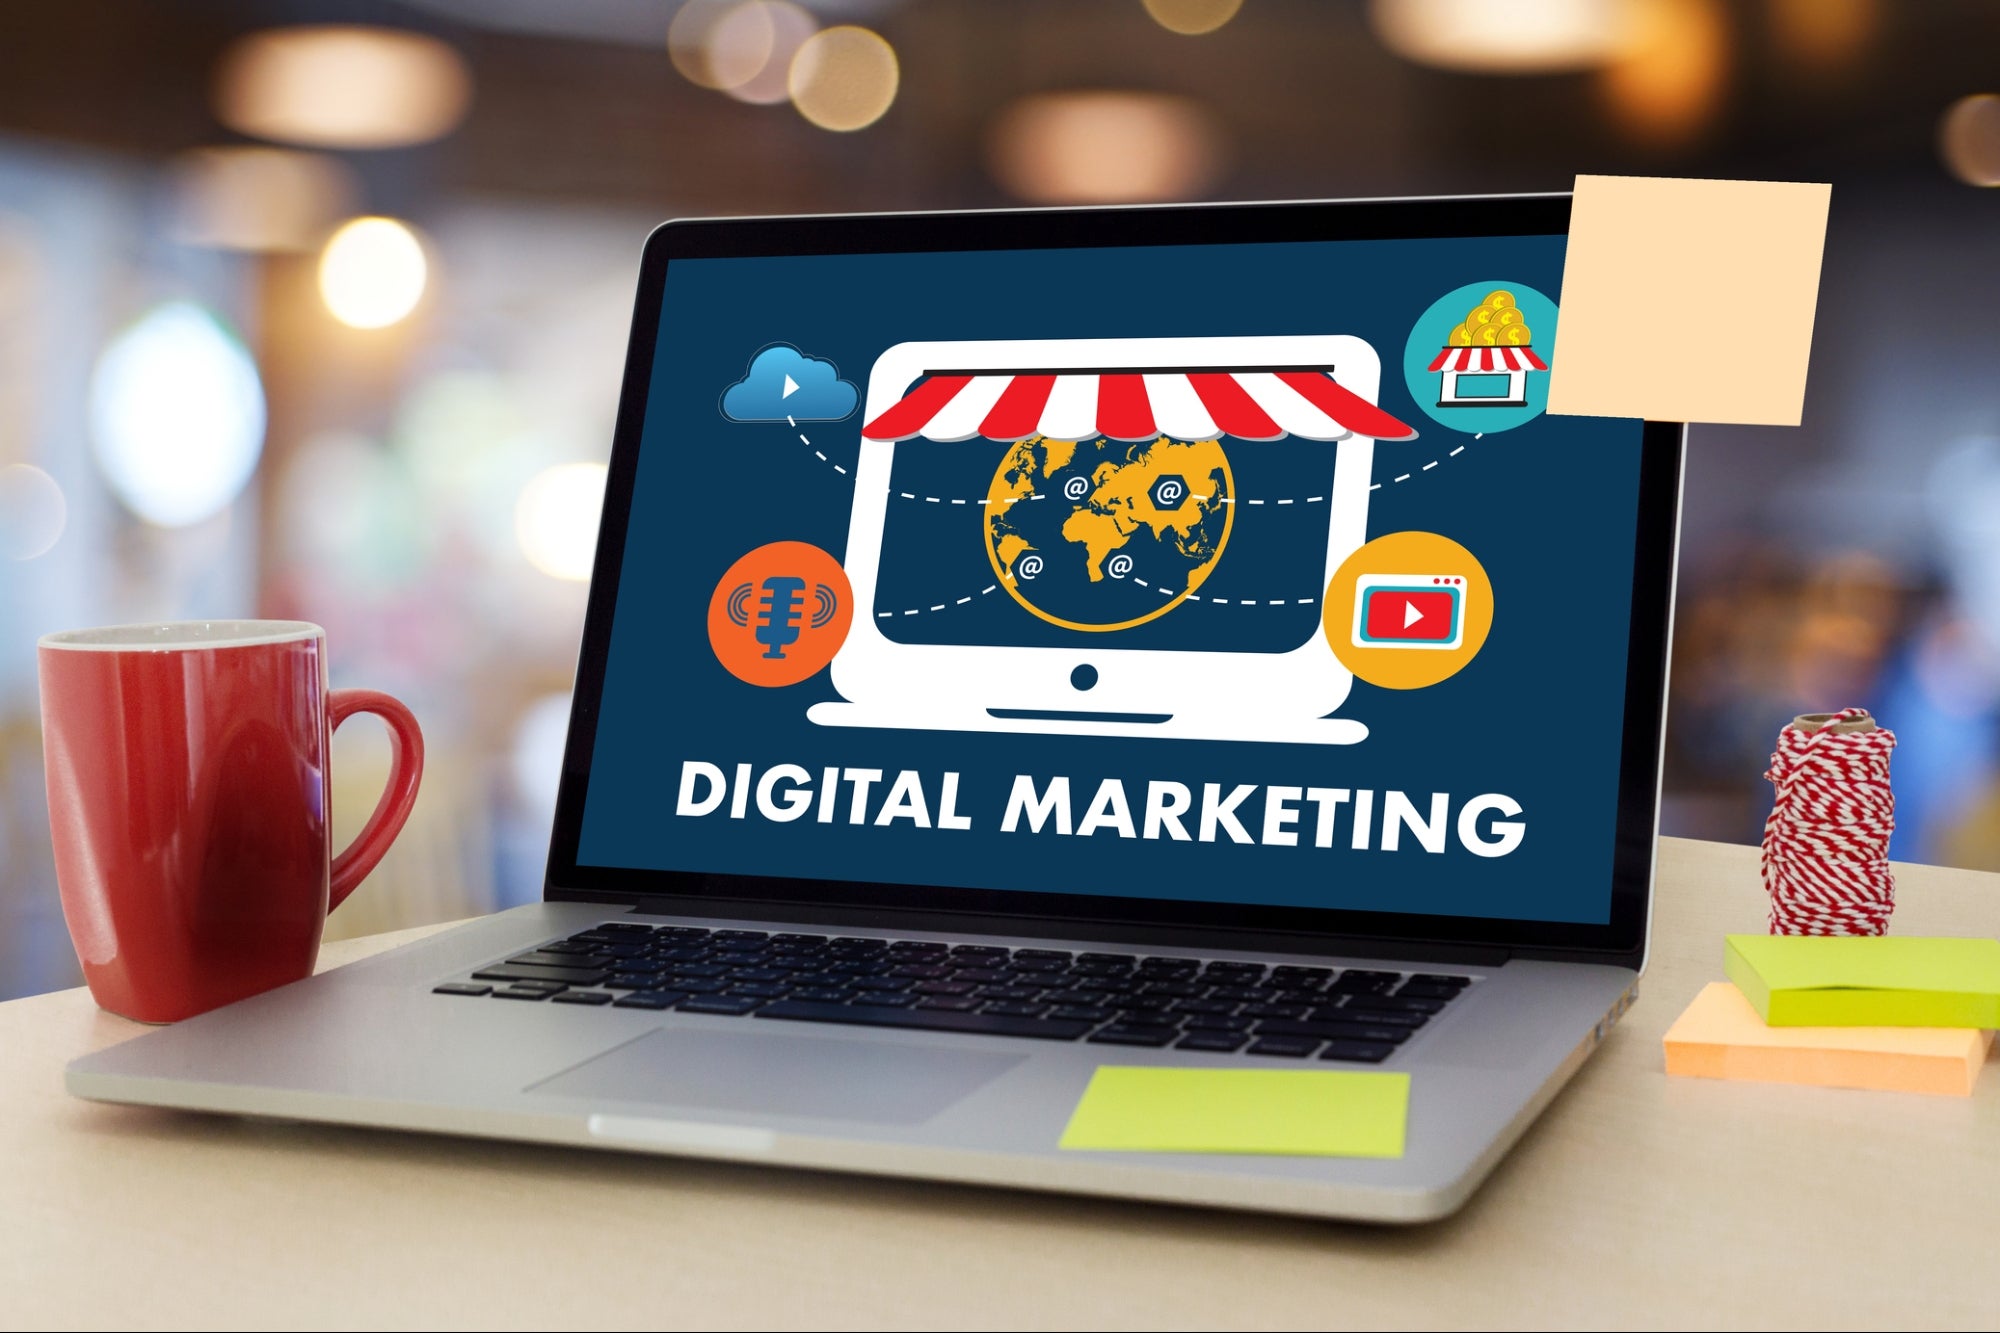 11 Tips to Make Digital Marketing Work for You